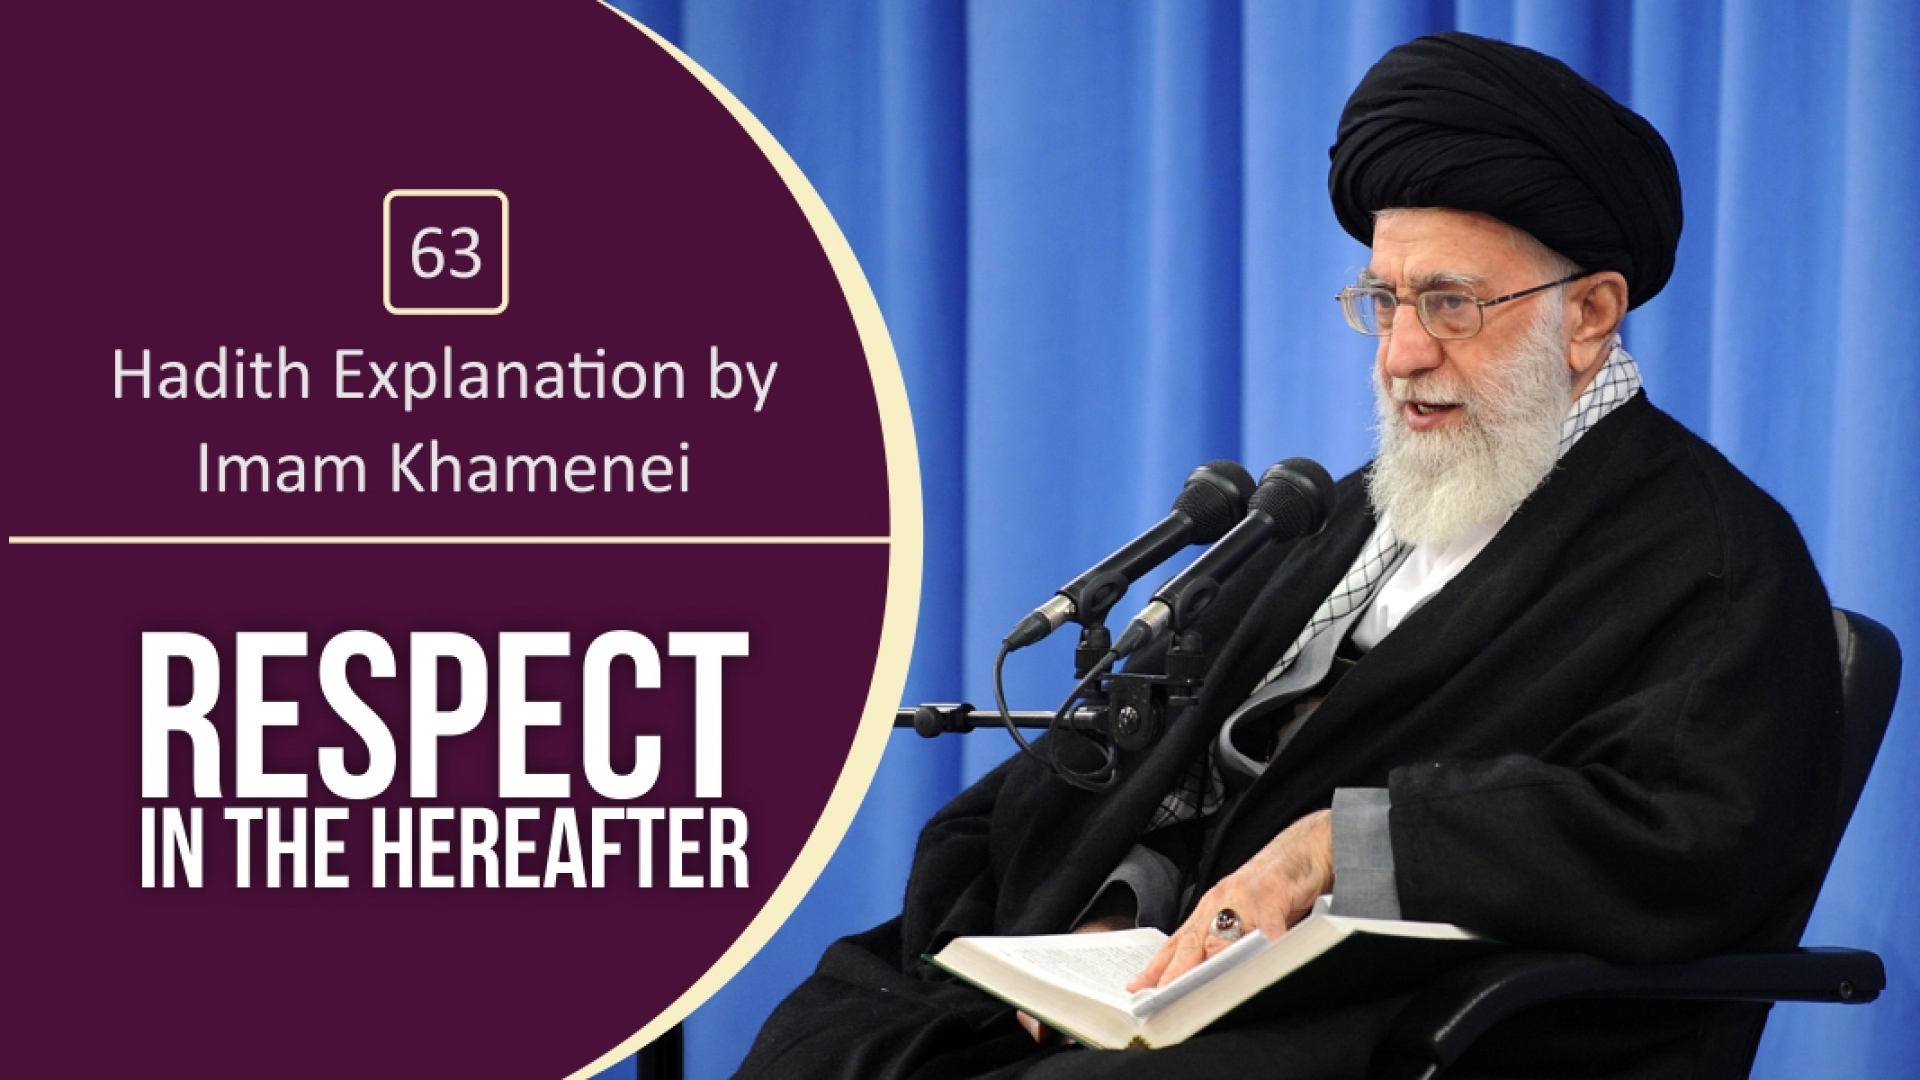 [63] Hadith Explanation by Imam Khamenei | Respect in the Hereafter | Farsi sub English